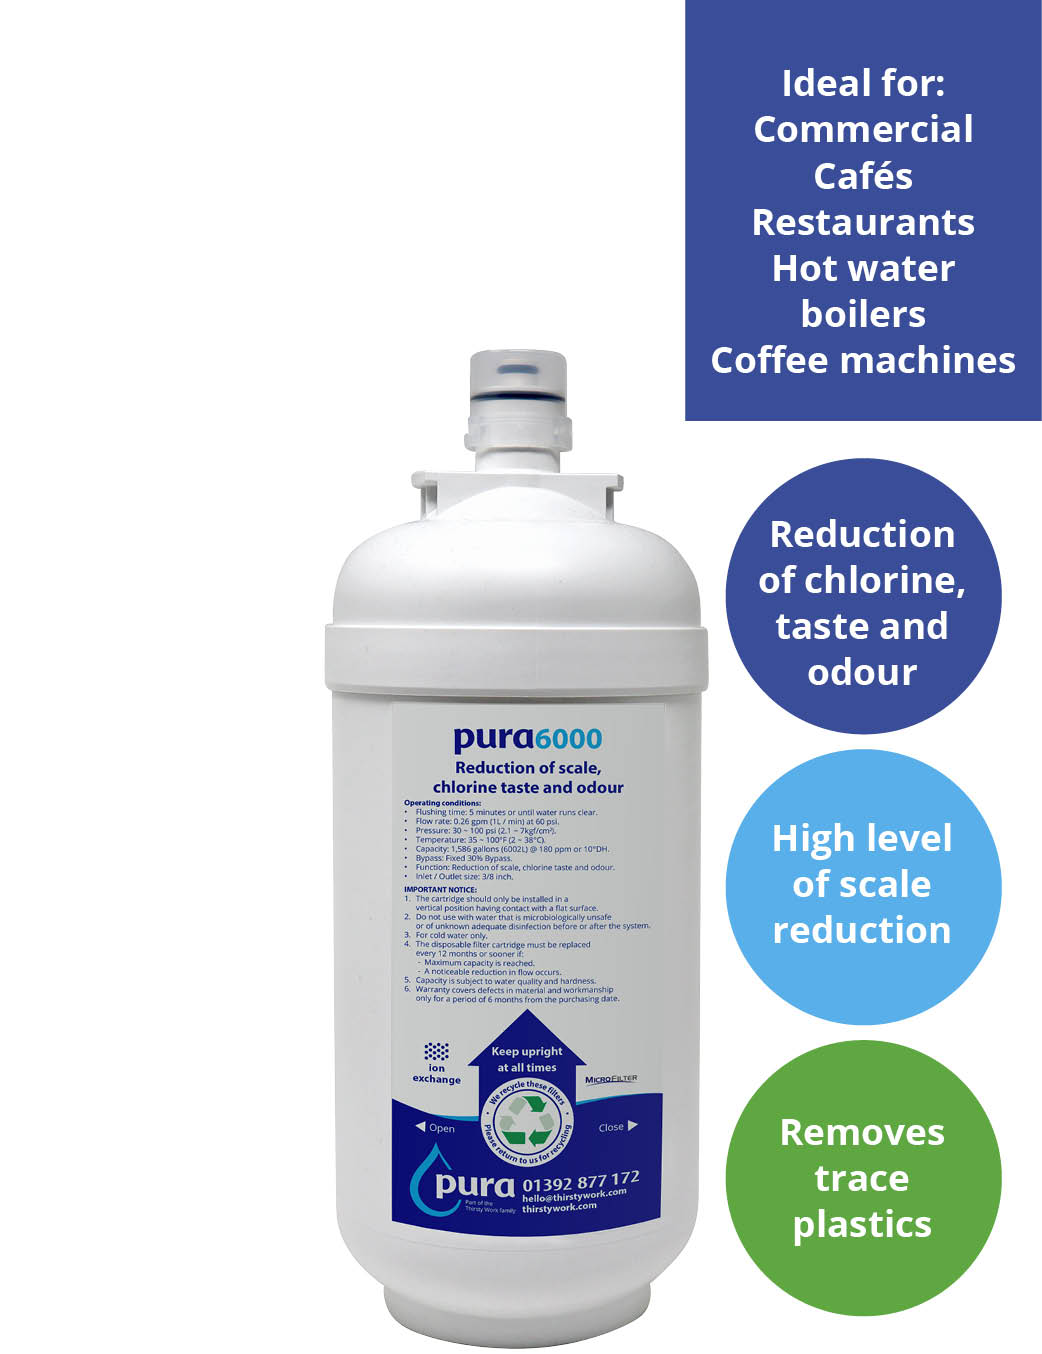 high capacity commercial water filter for use in coffee machines and hot water boilers